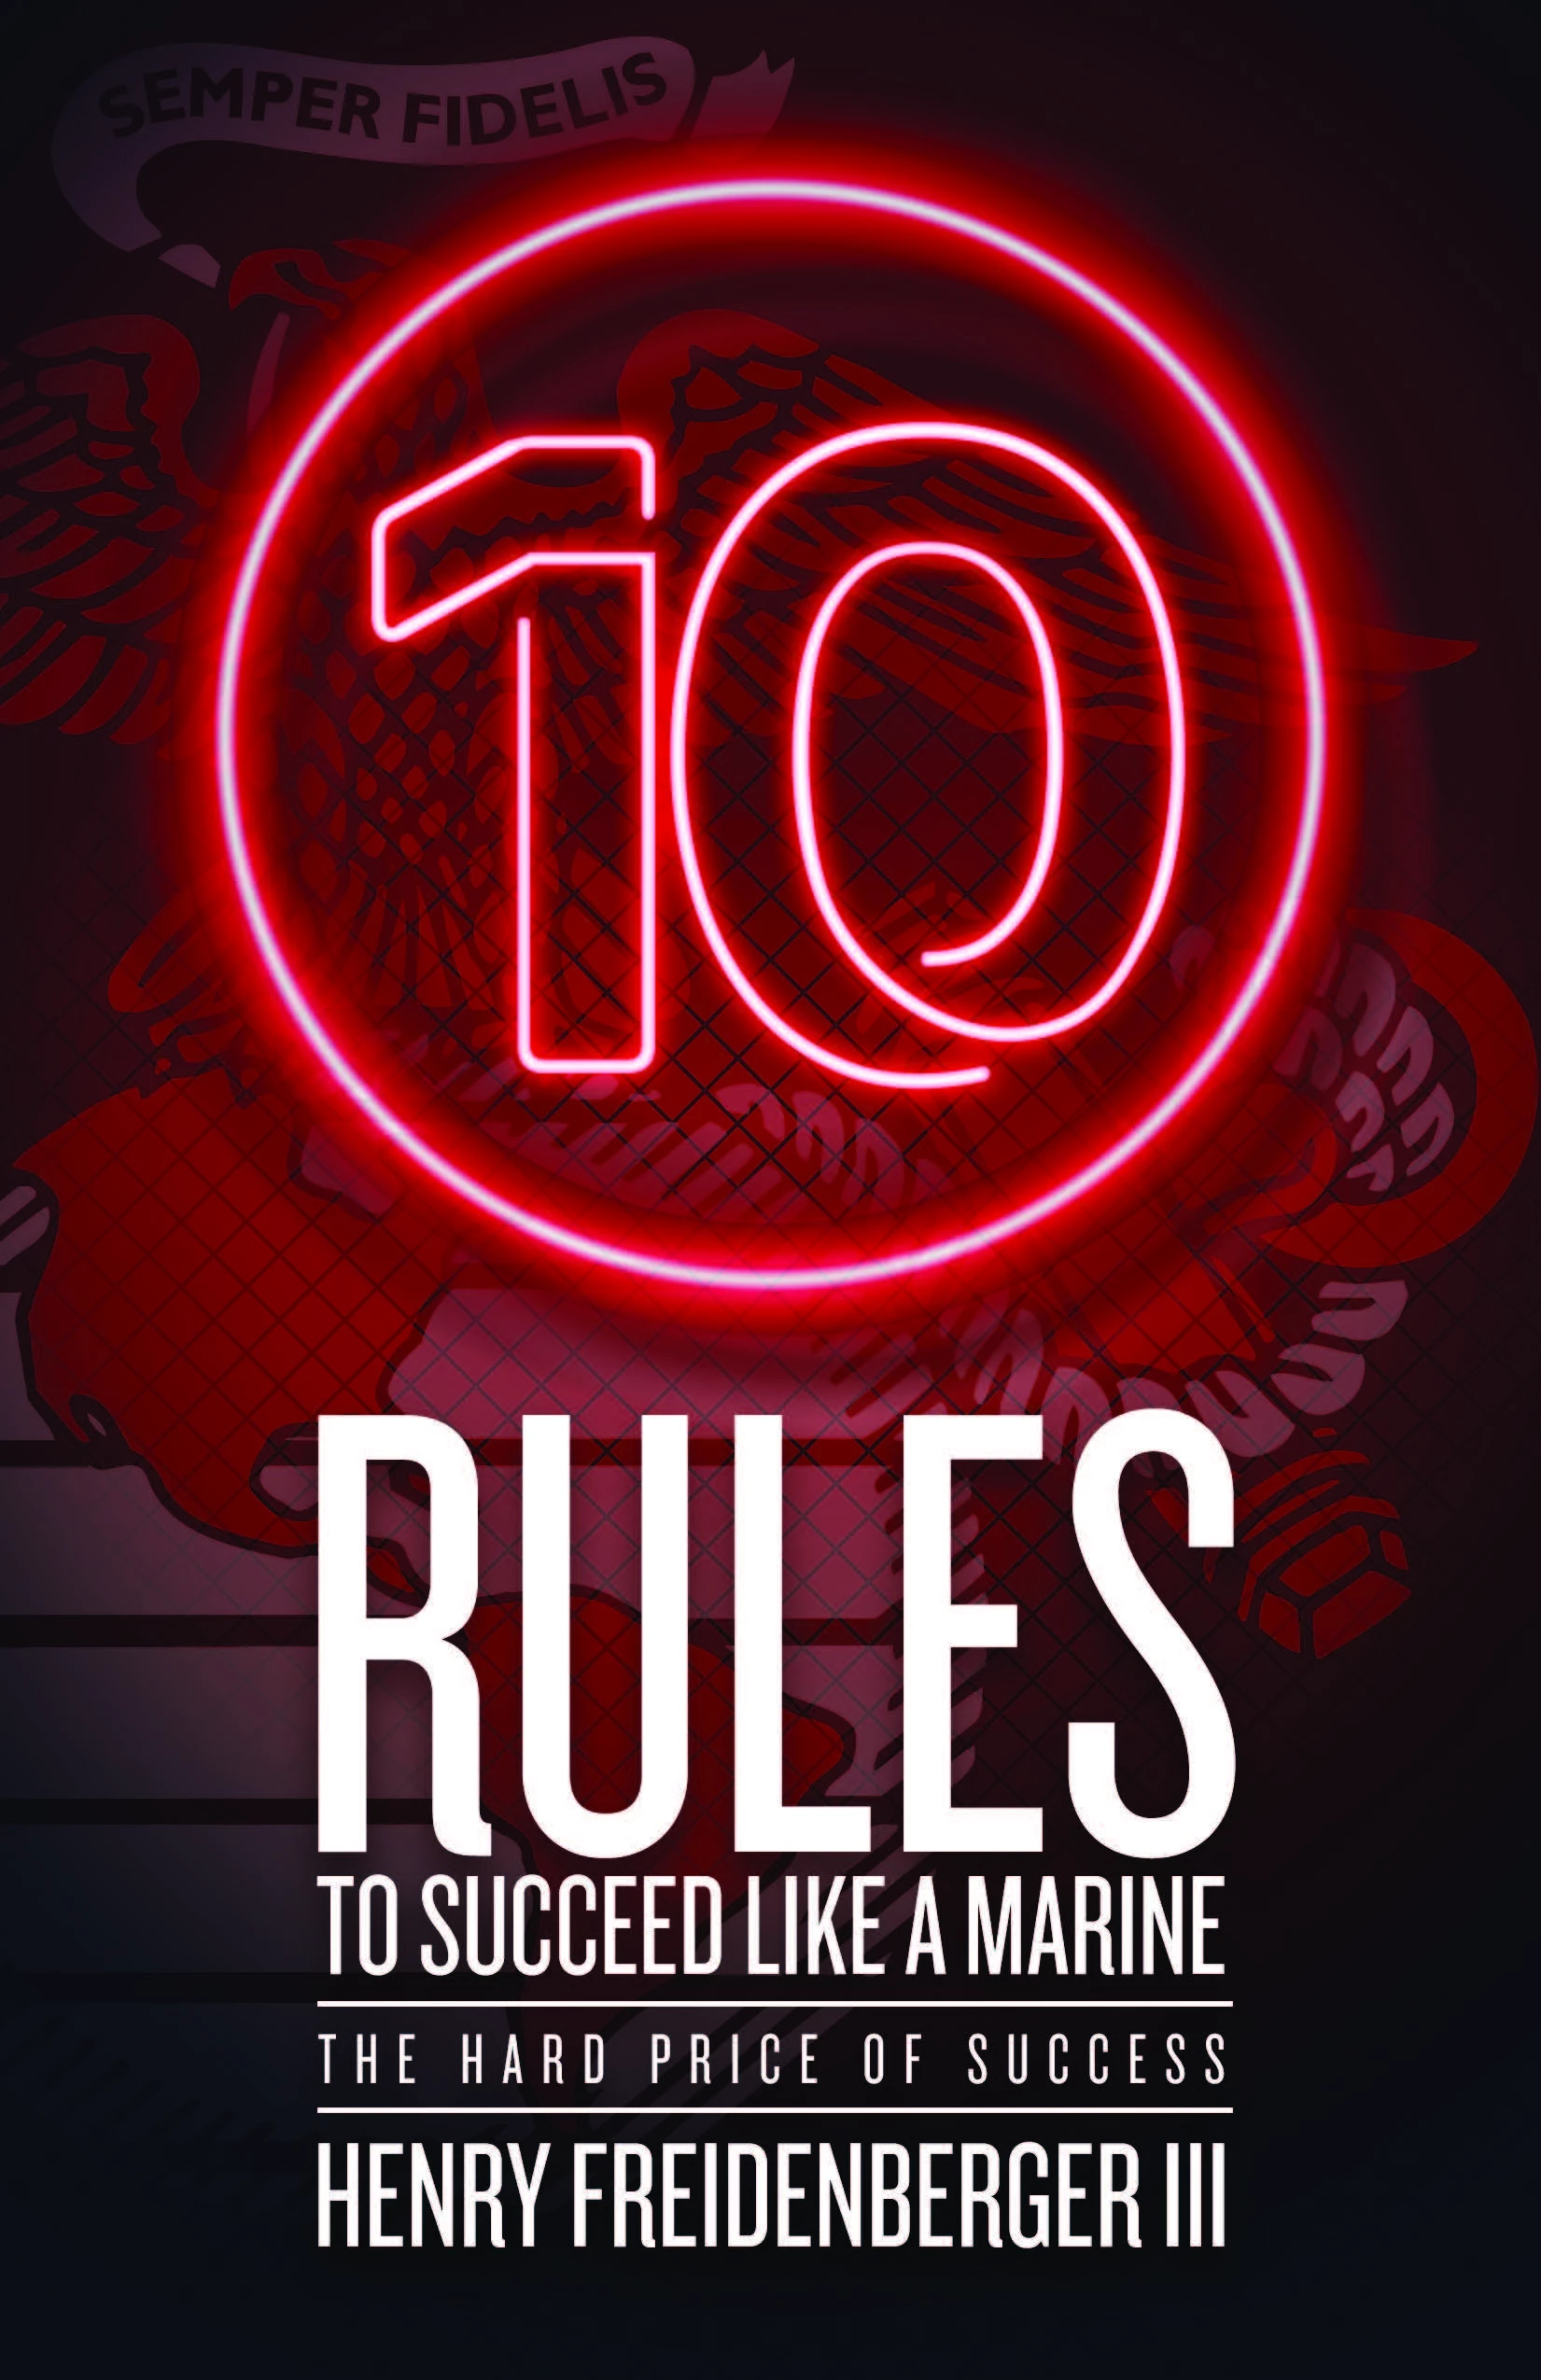 10 Rules to Succeed Like a Marine – the Hard Price of Success